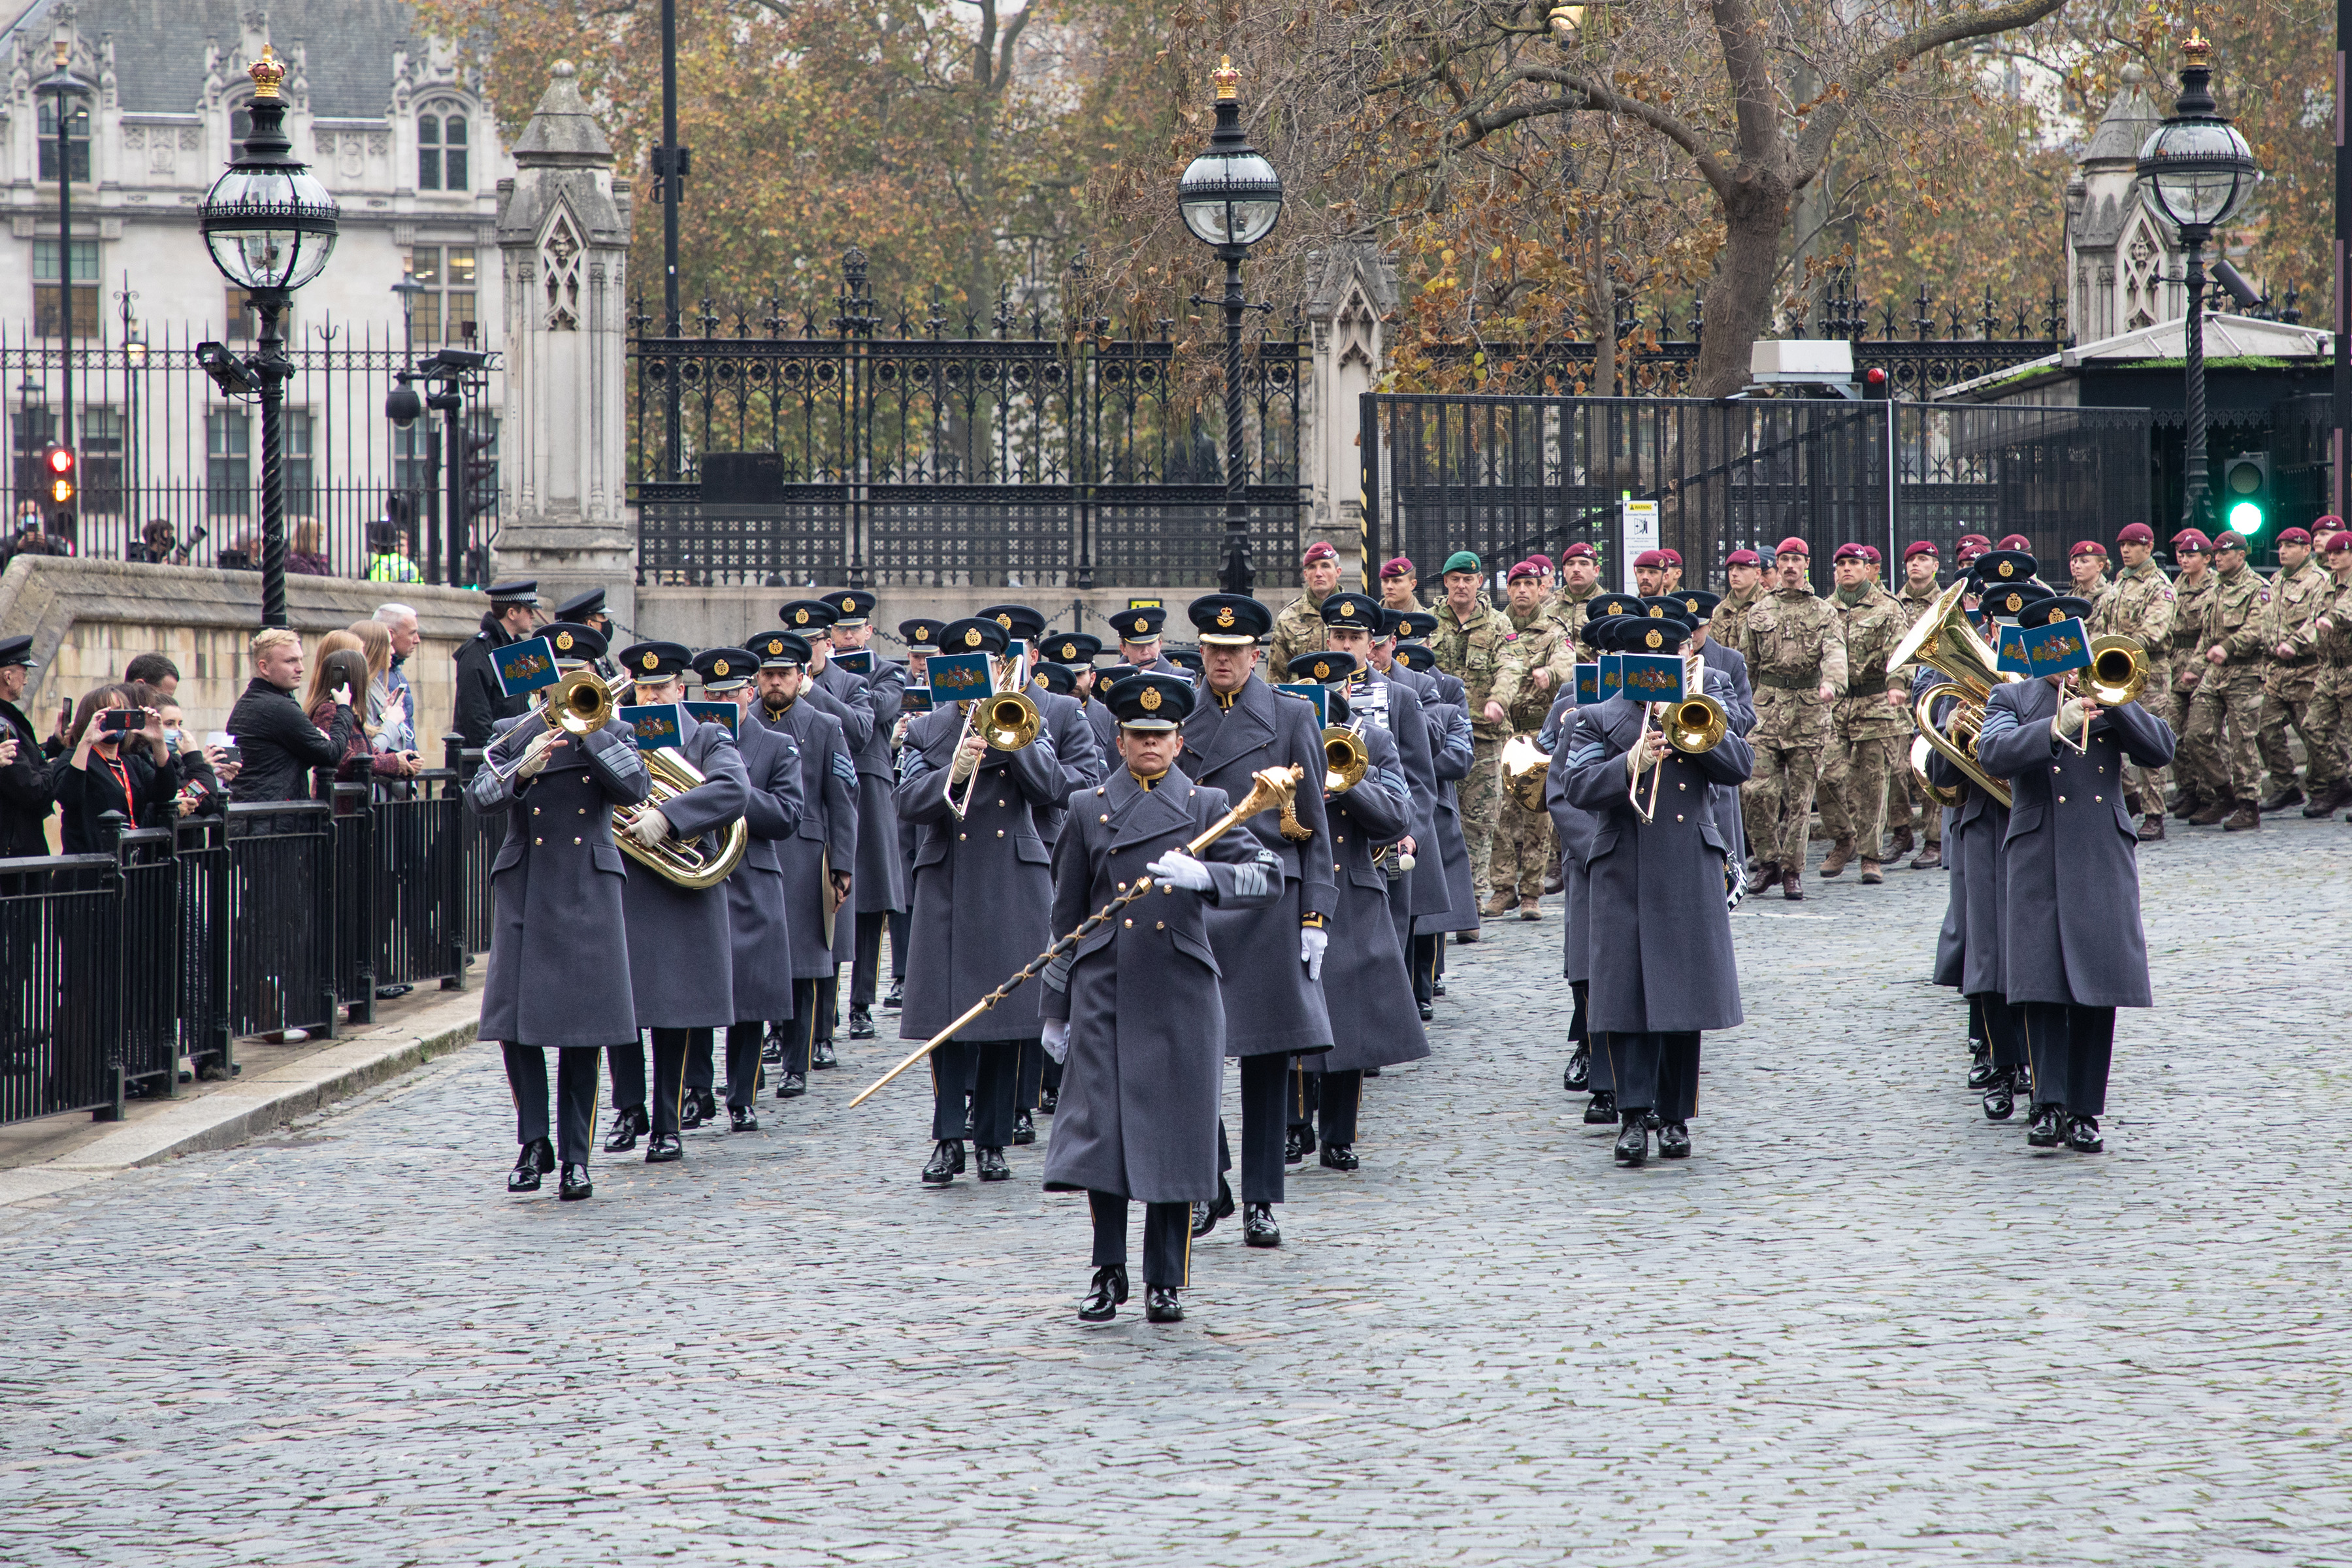 Central Band of the RAF leading the parade with Army troops following. .